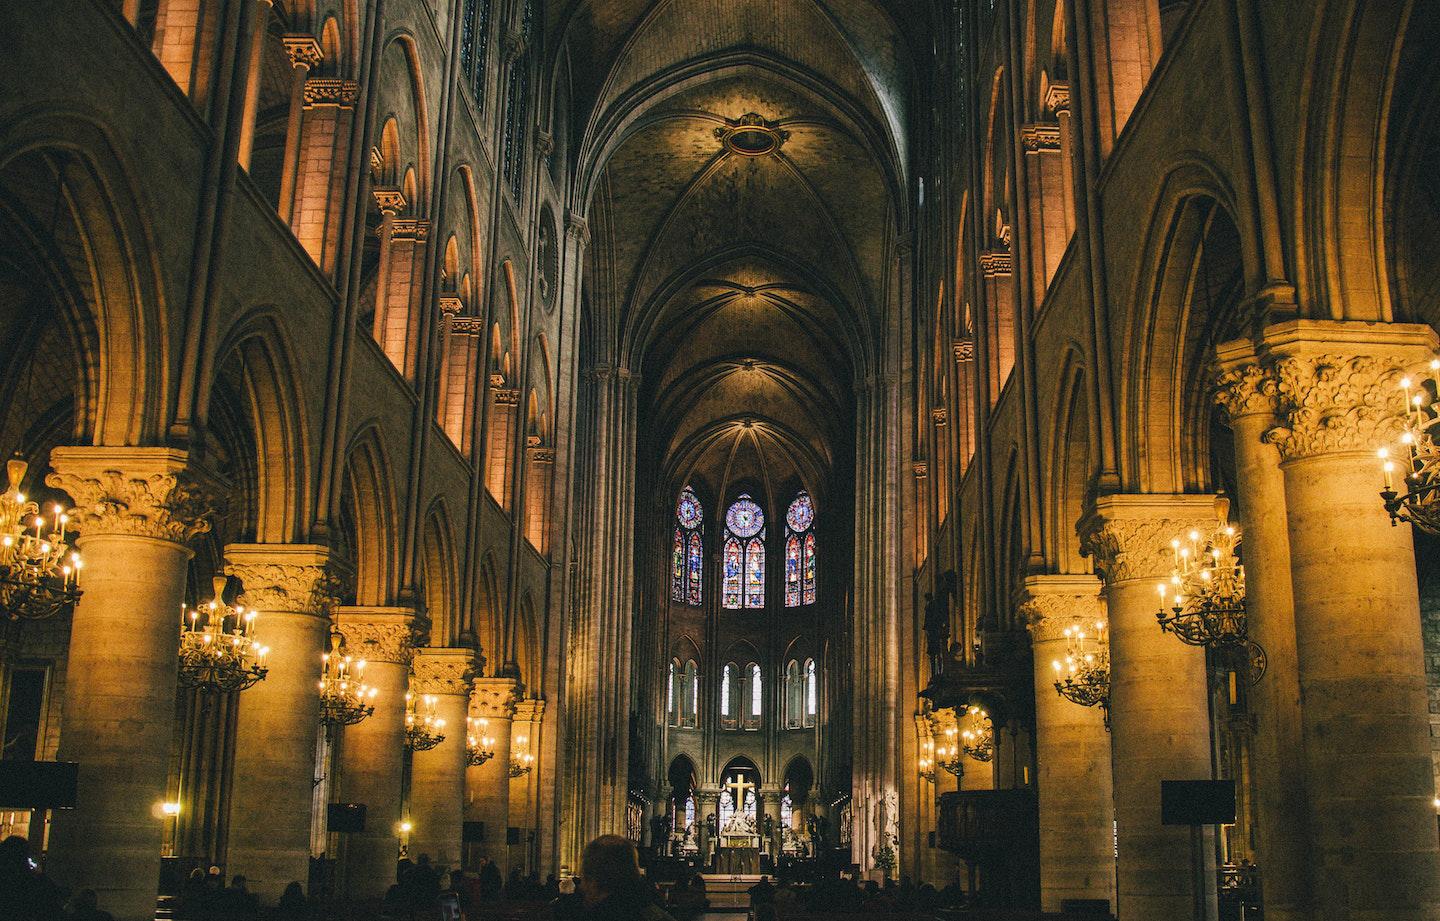 Damage to the interior was largely prevented by the cathedral's vaulted ceiling (Photo via Pexels)